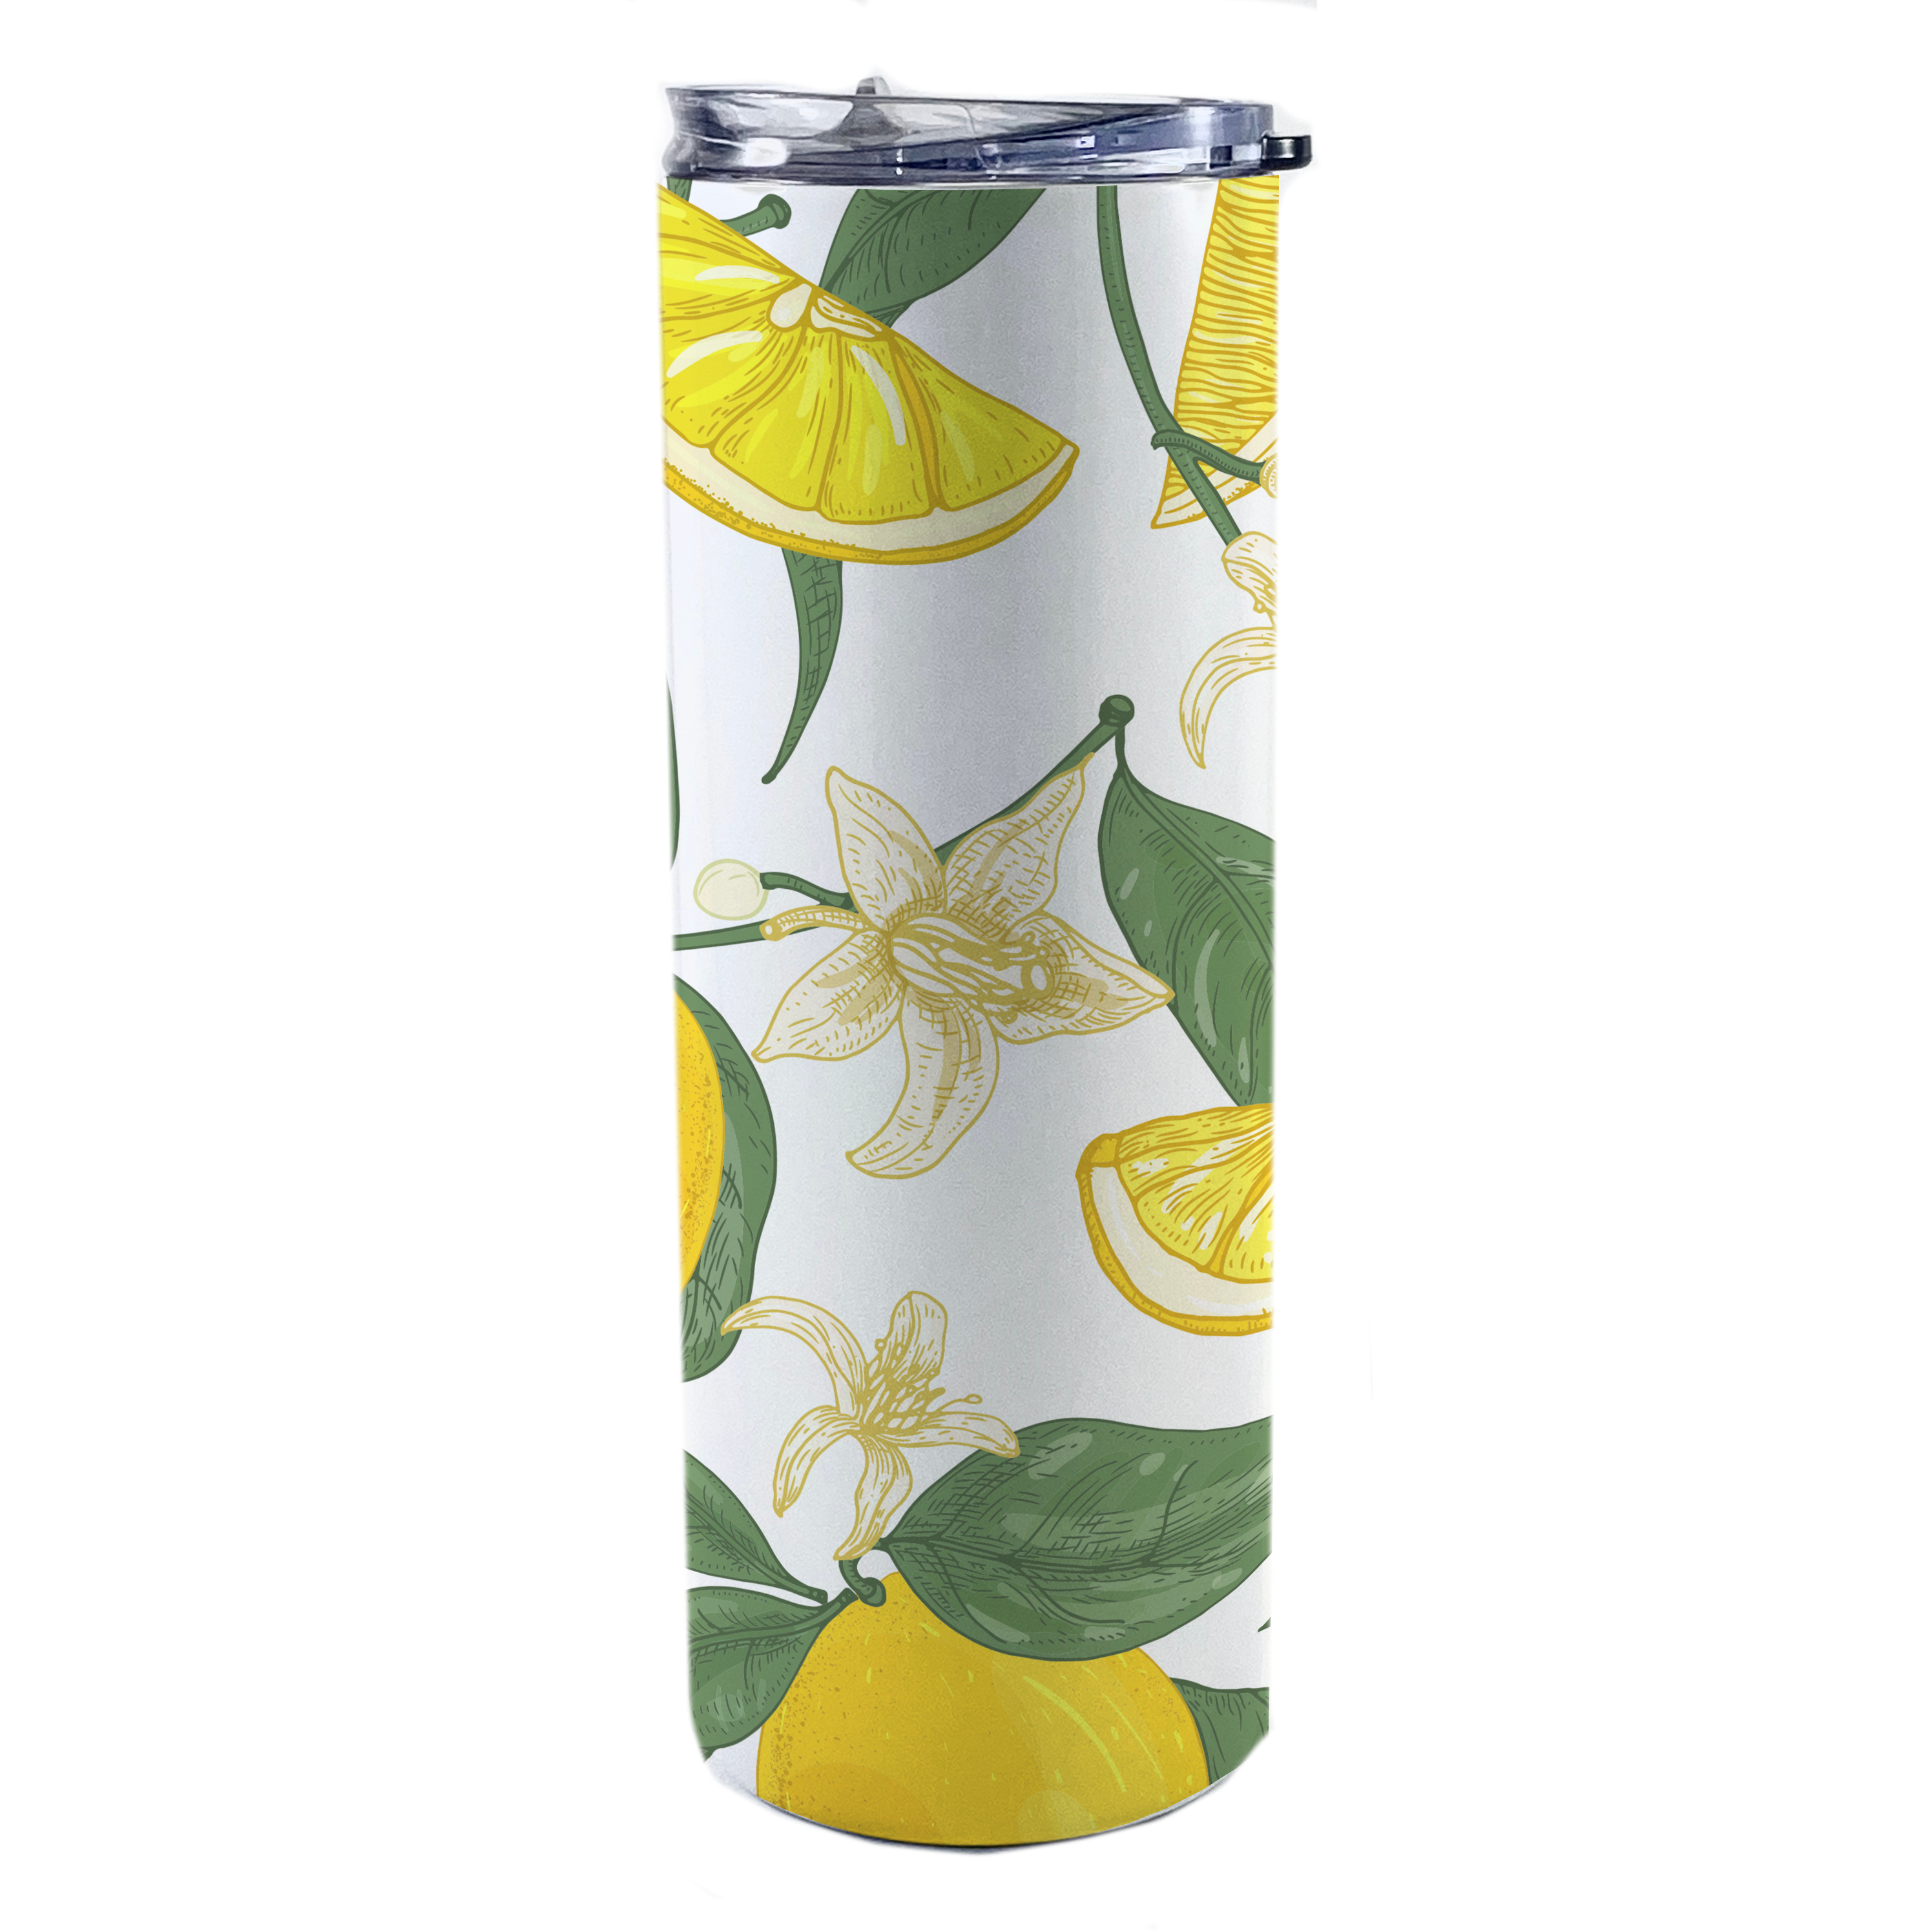 Trend Setters Originals (Lemons) 20 Oz Stainless Steel Travel Tumbler with Straw